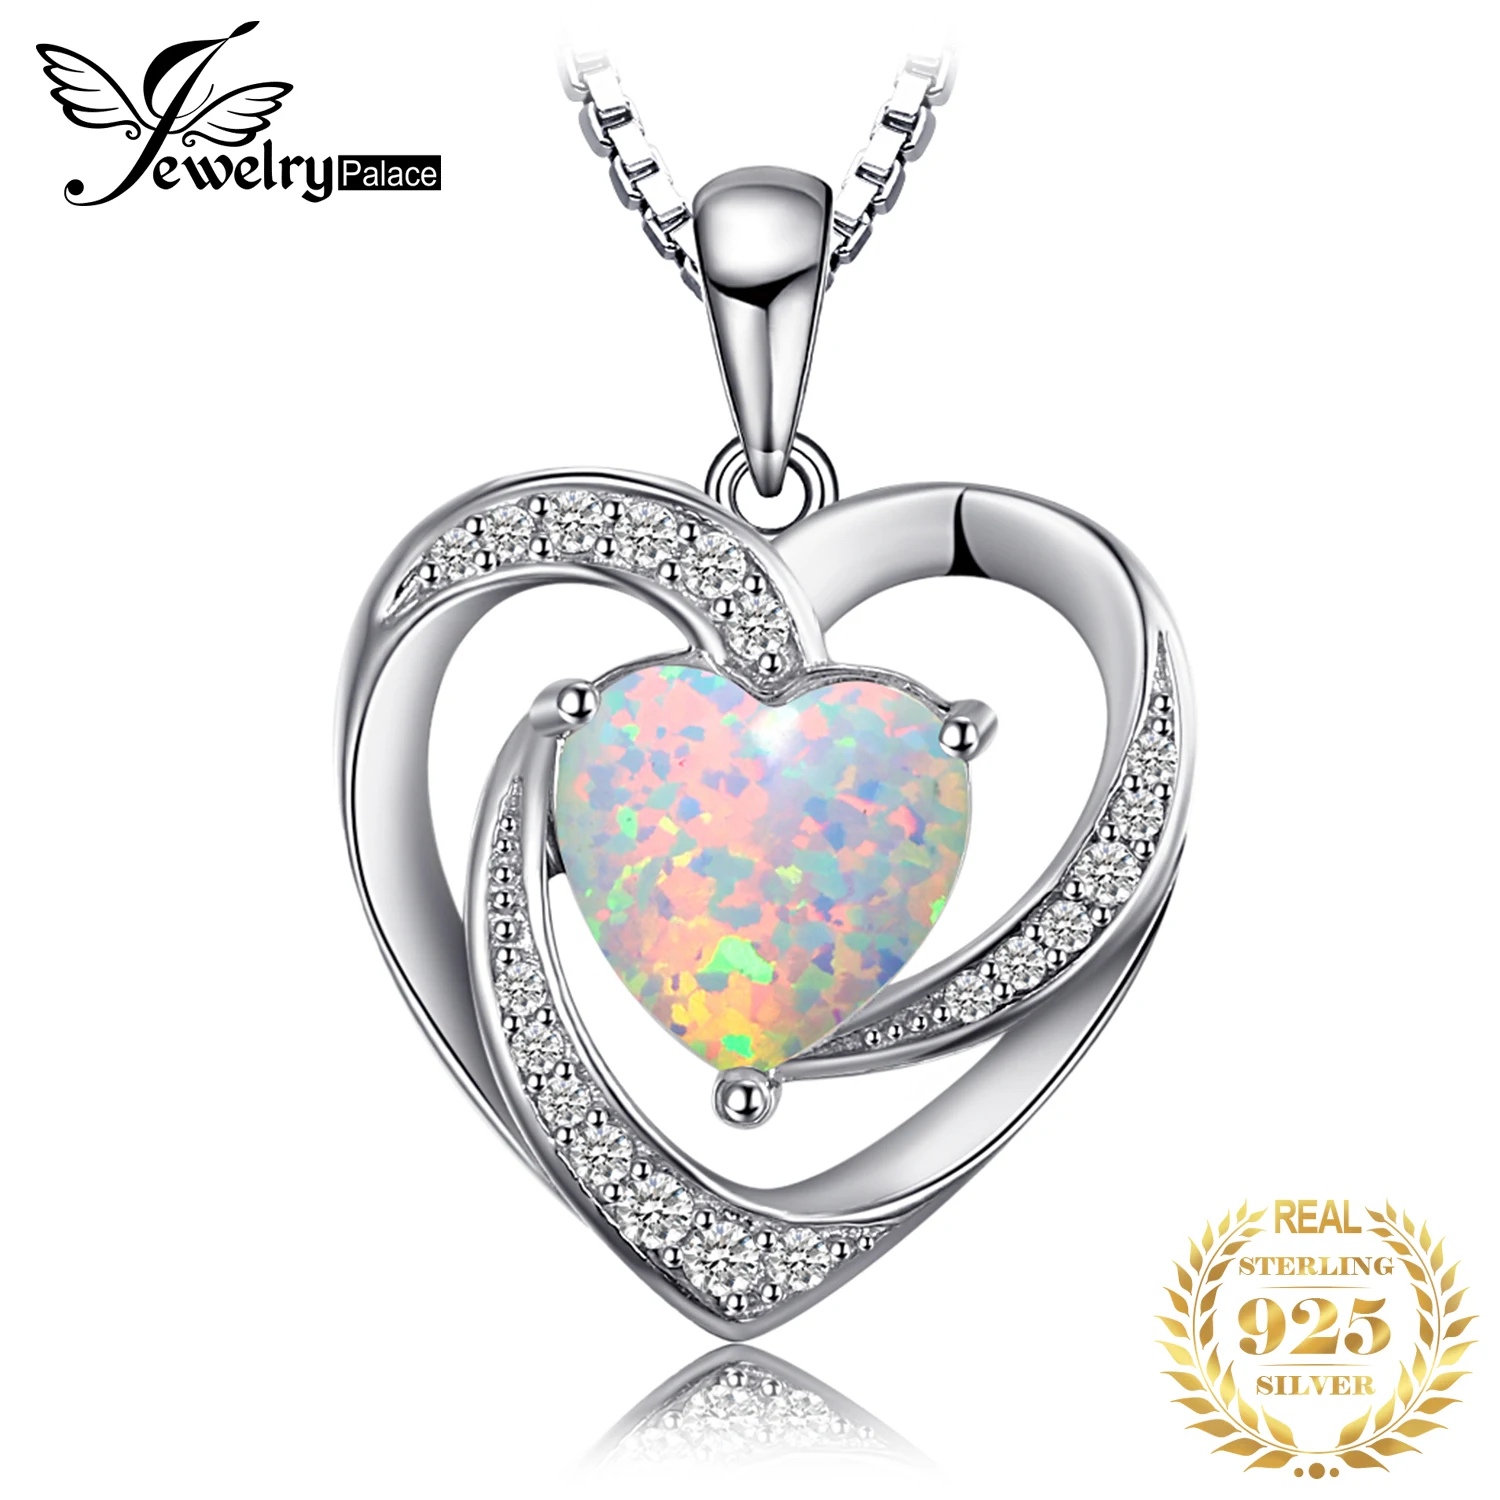 

JewelryPalace Heart Created Opal Pendant Necklace 925 Sterling Silver Gemstones Choker Statement Necklace Women No Chain